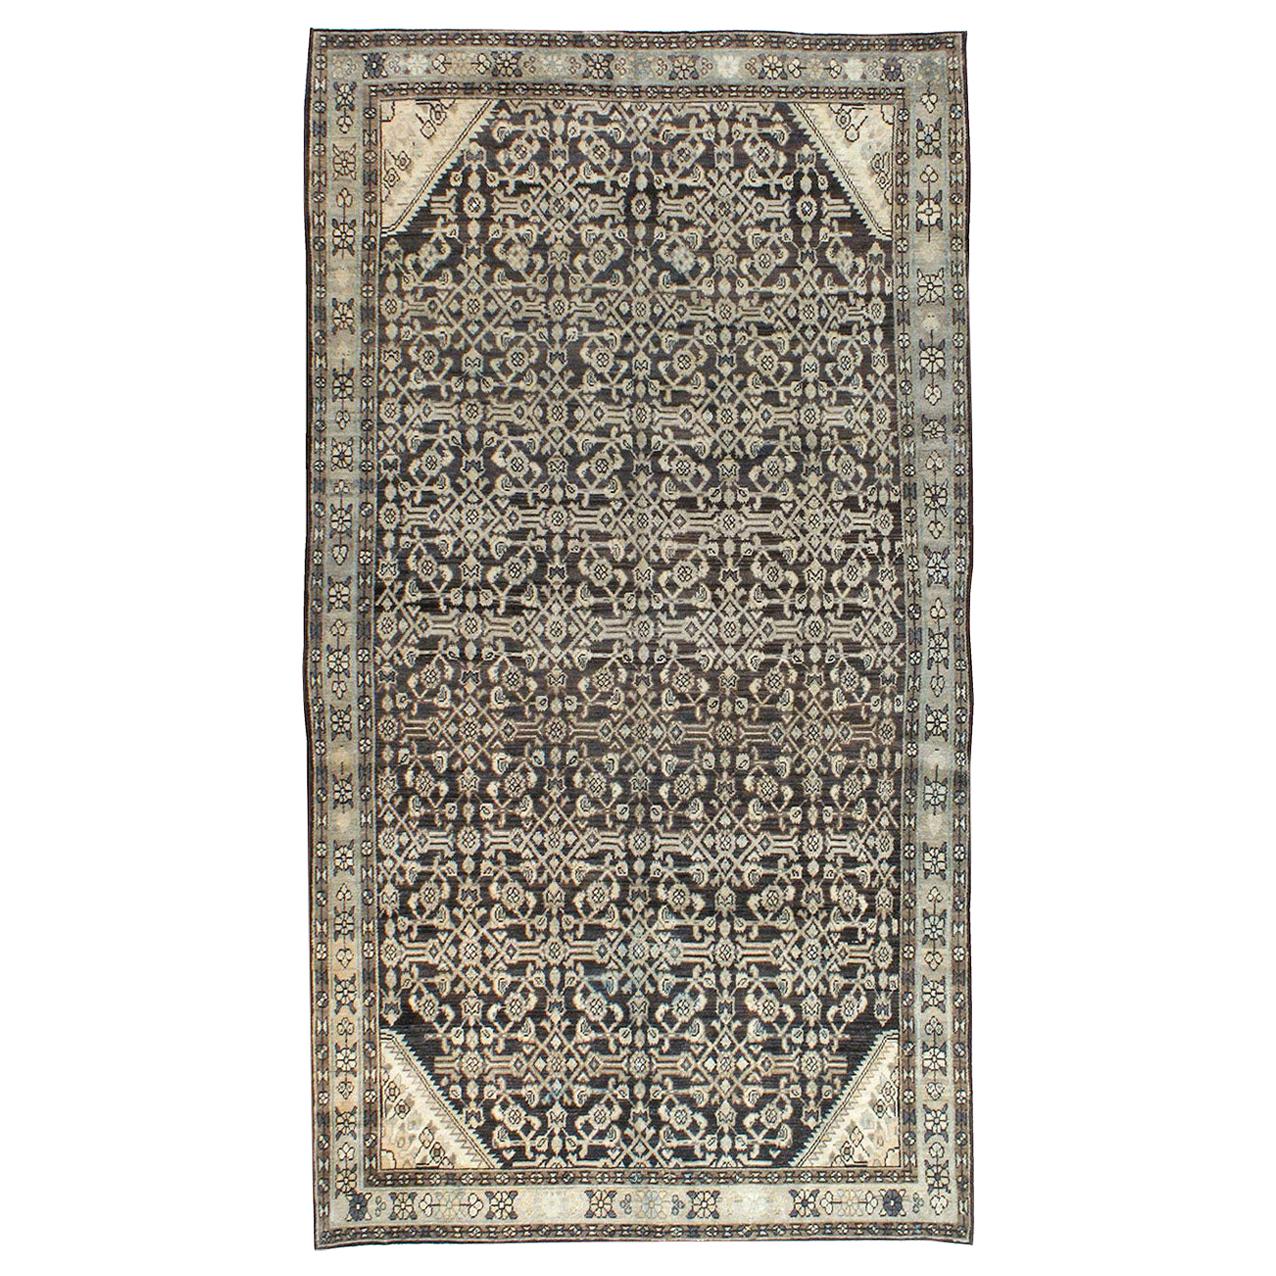 Mid-20th Century Small Room Size Persian Malayer Accent Rug in Charcoal Brown